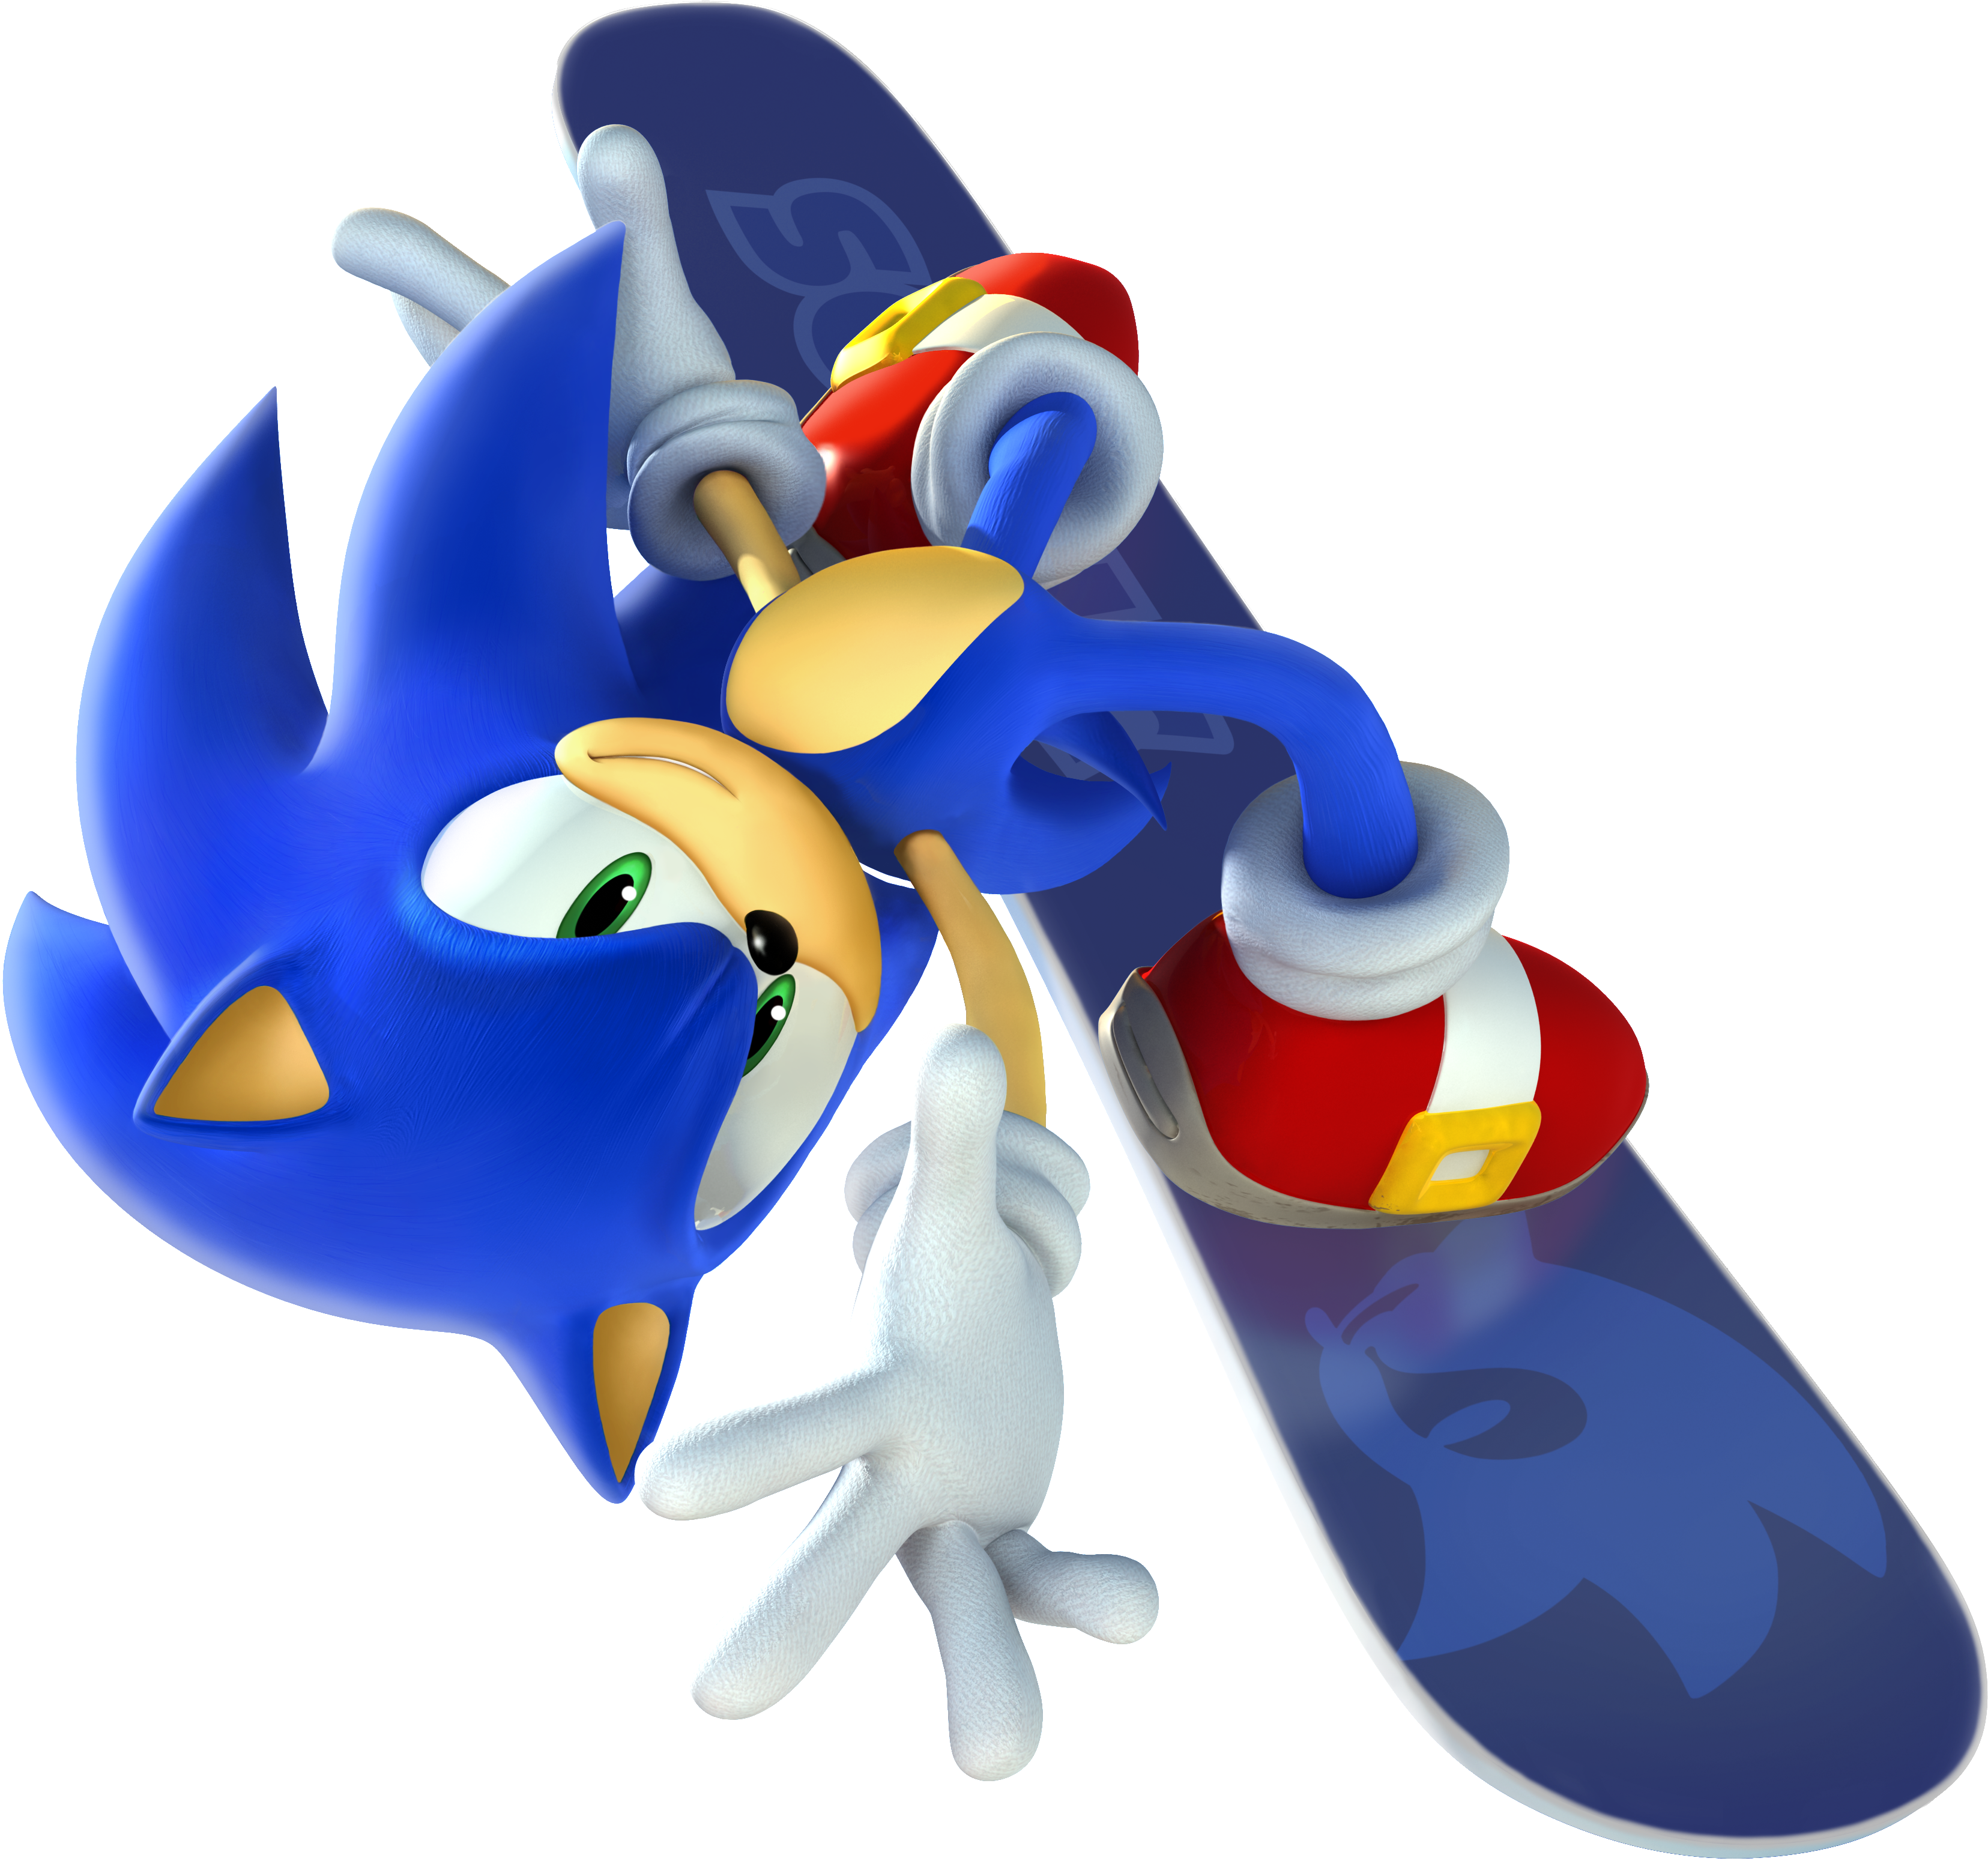 Mario & Sonic At The Olympic Winter Games - Mario And Sonic At The Olympic Winter Games Sonic (3764x3647)